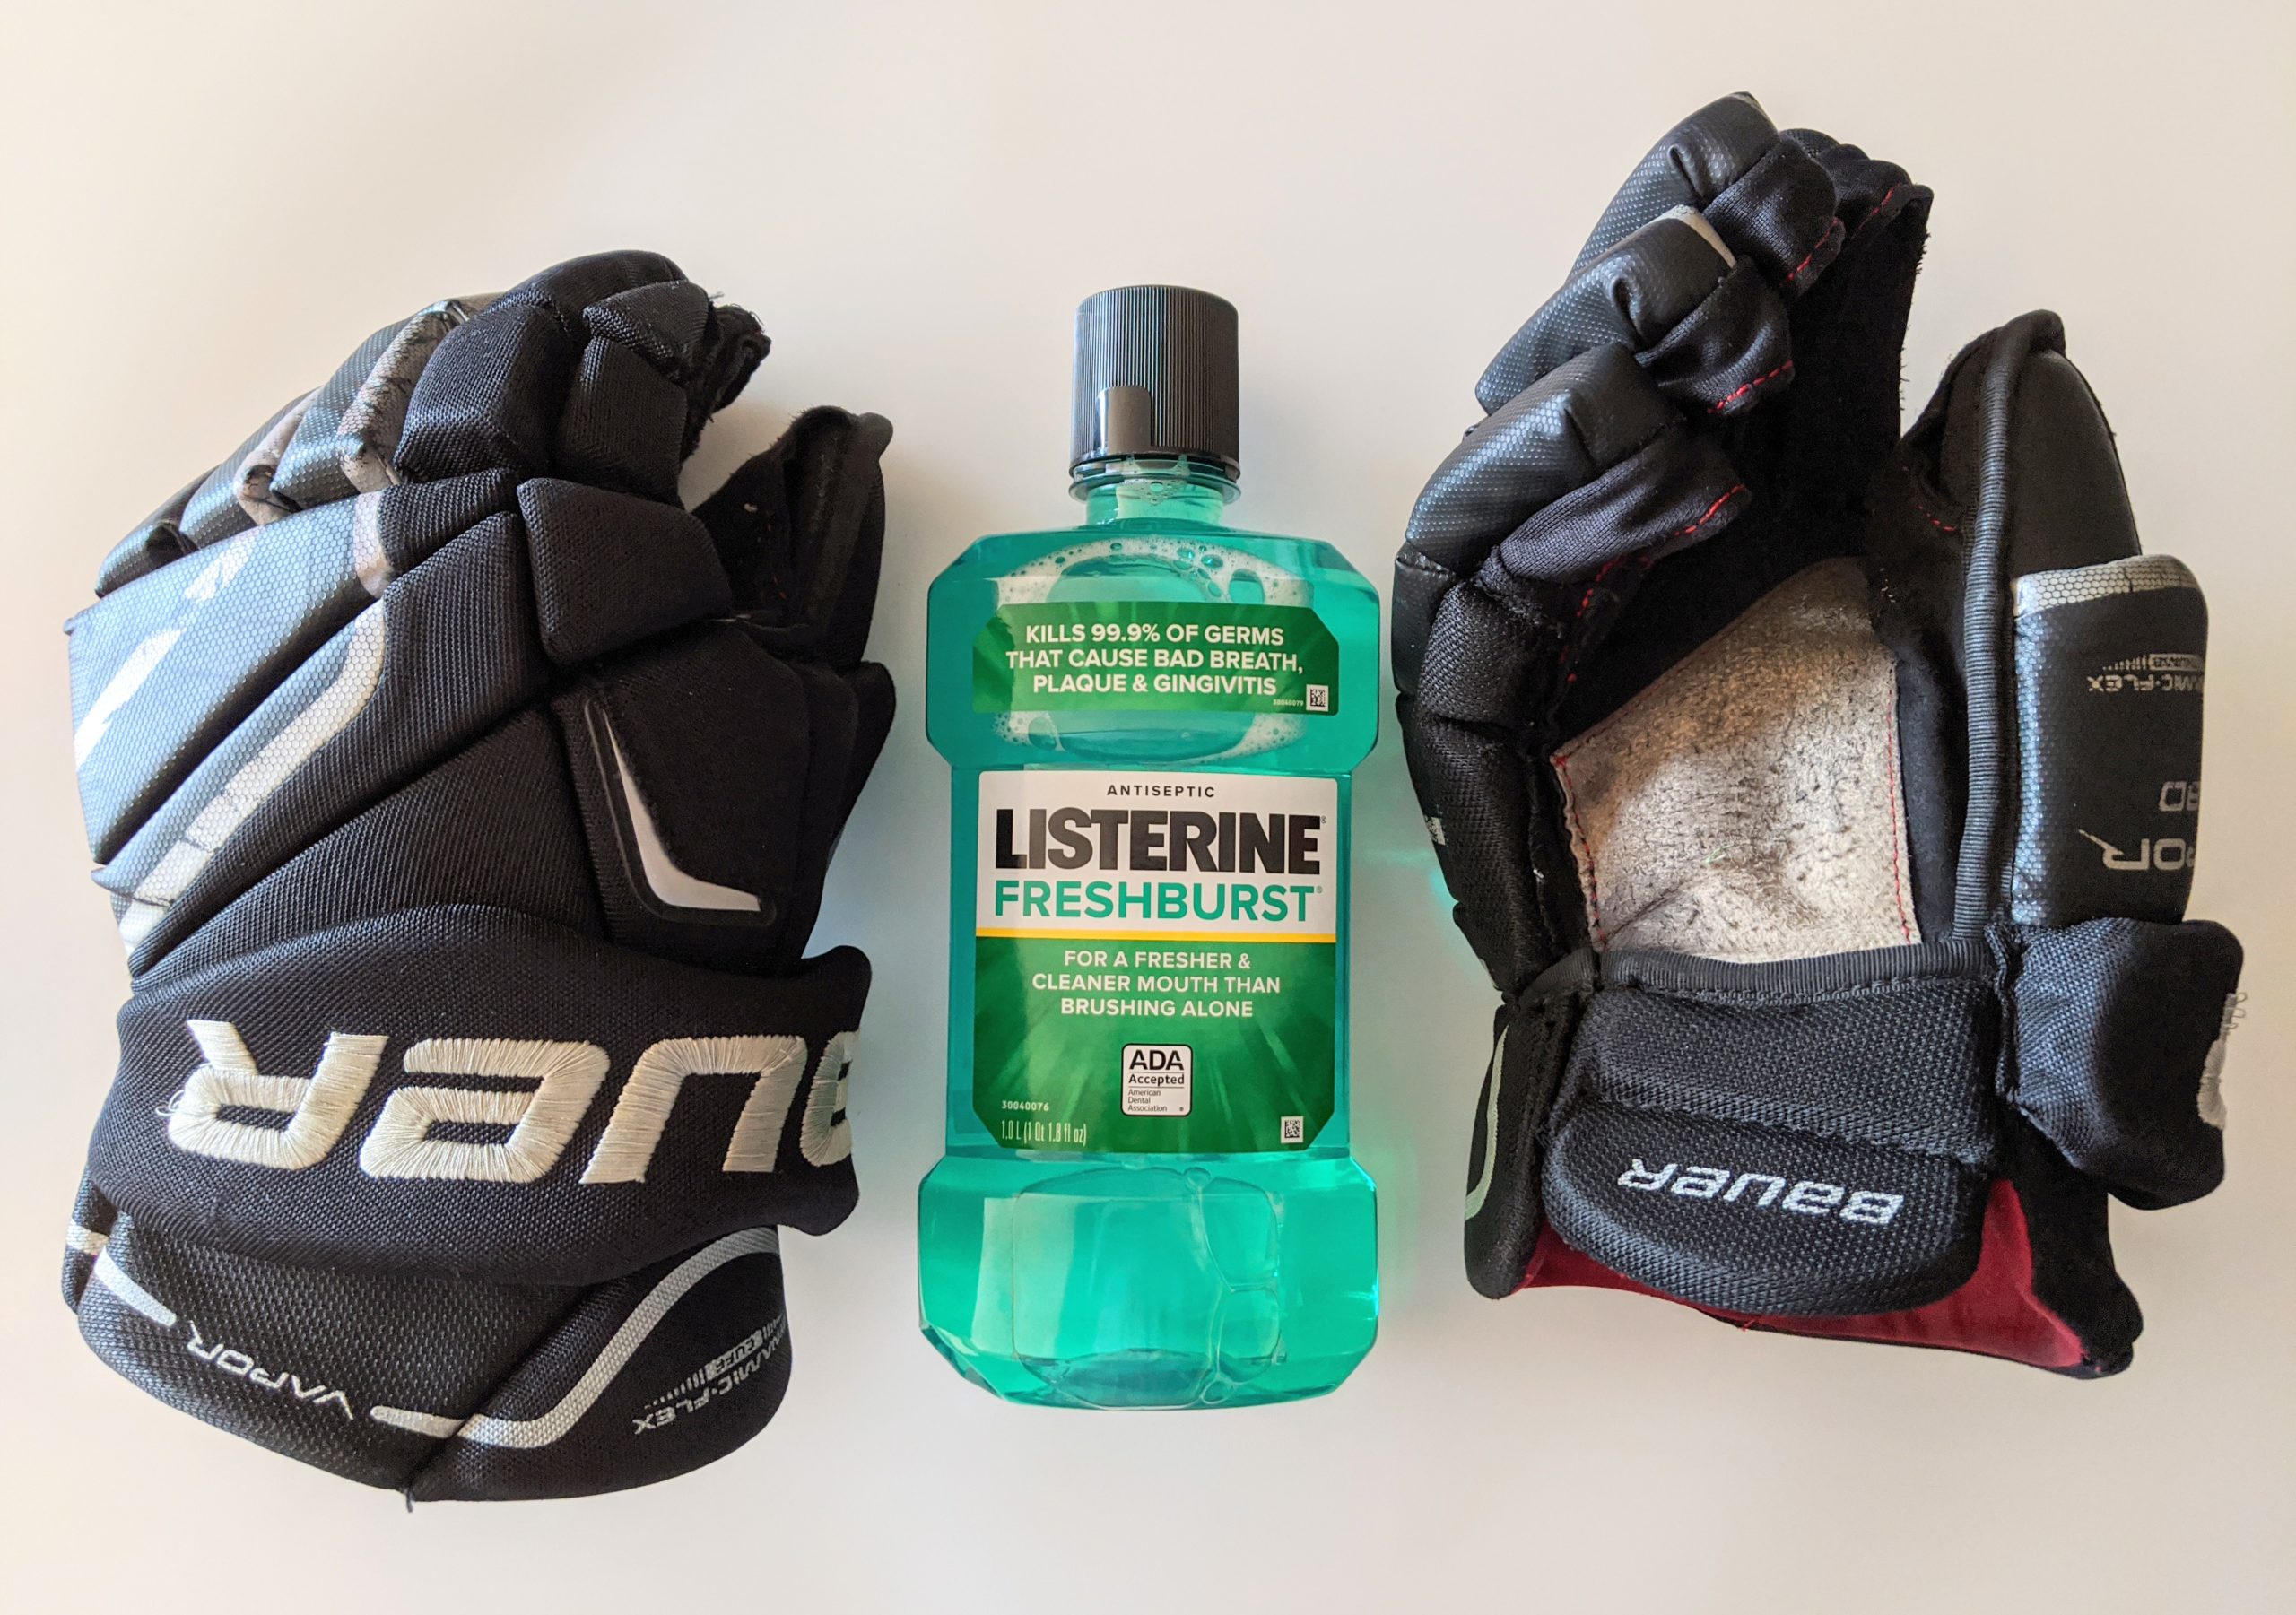 How to Clean Hockey Gloves?